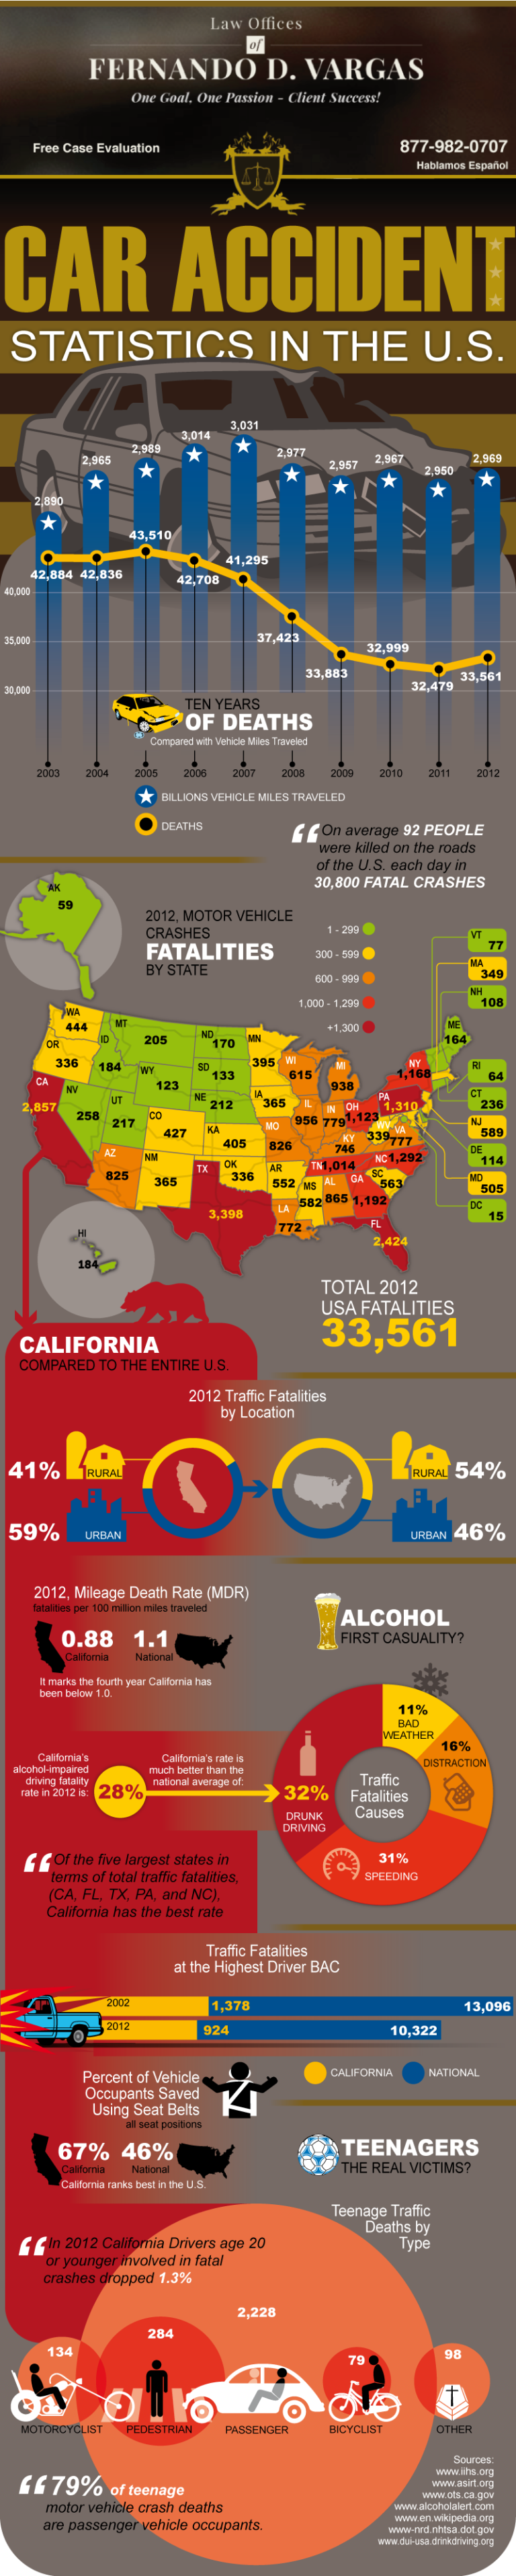 Car Accident Statistics In The U.S. Infographic Law Offices of